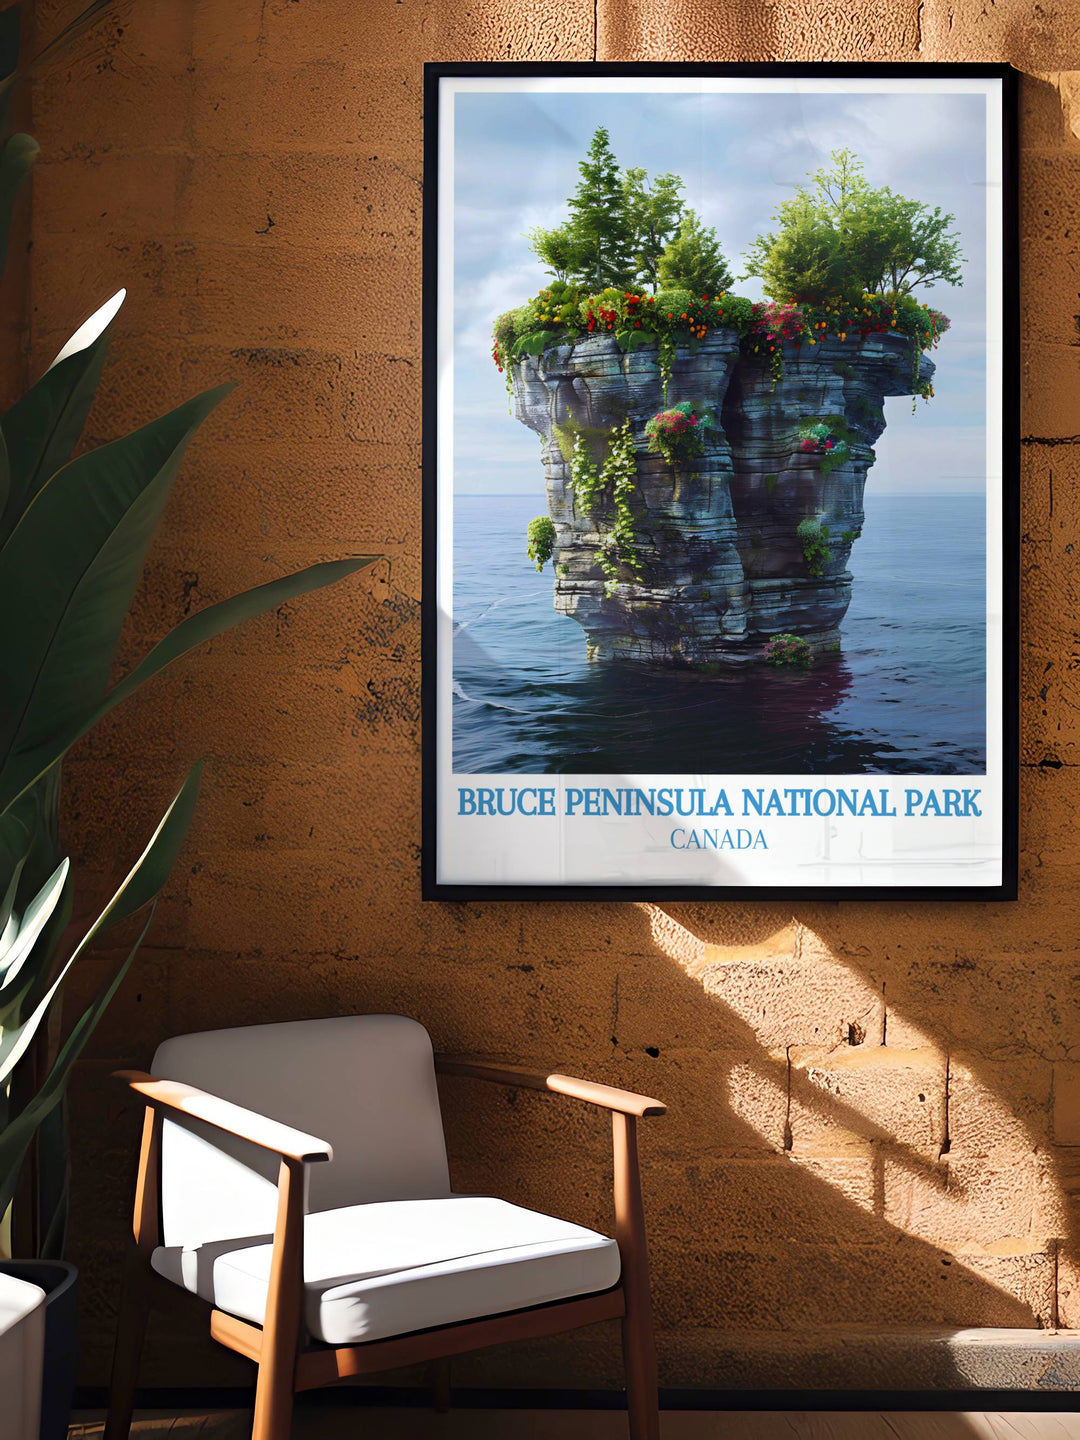 The Flowerpot Island Cottagecore Decor print adds a touch of nature inspired elegance to your home decor with its detailed portrayal of the islands distinctive rock formations and peaceful surroundings